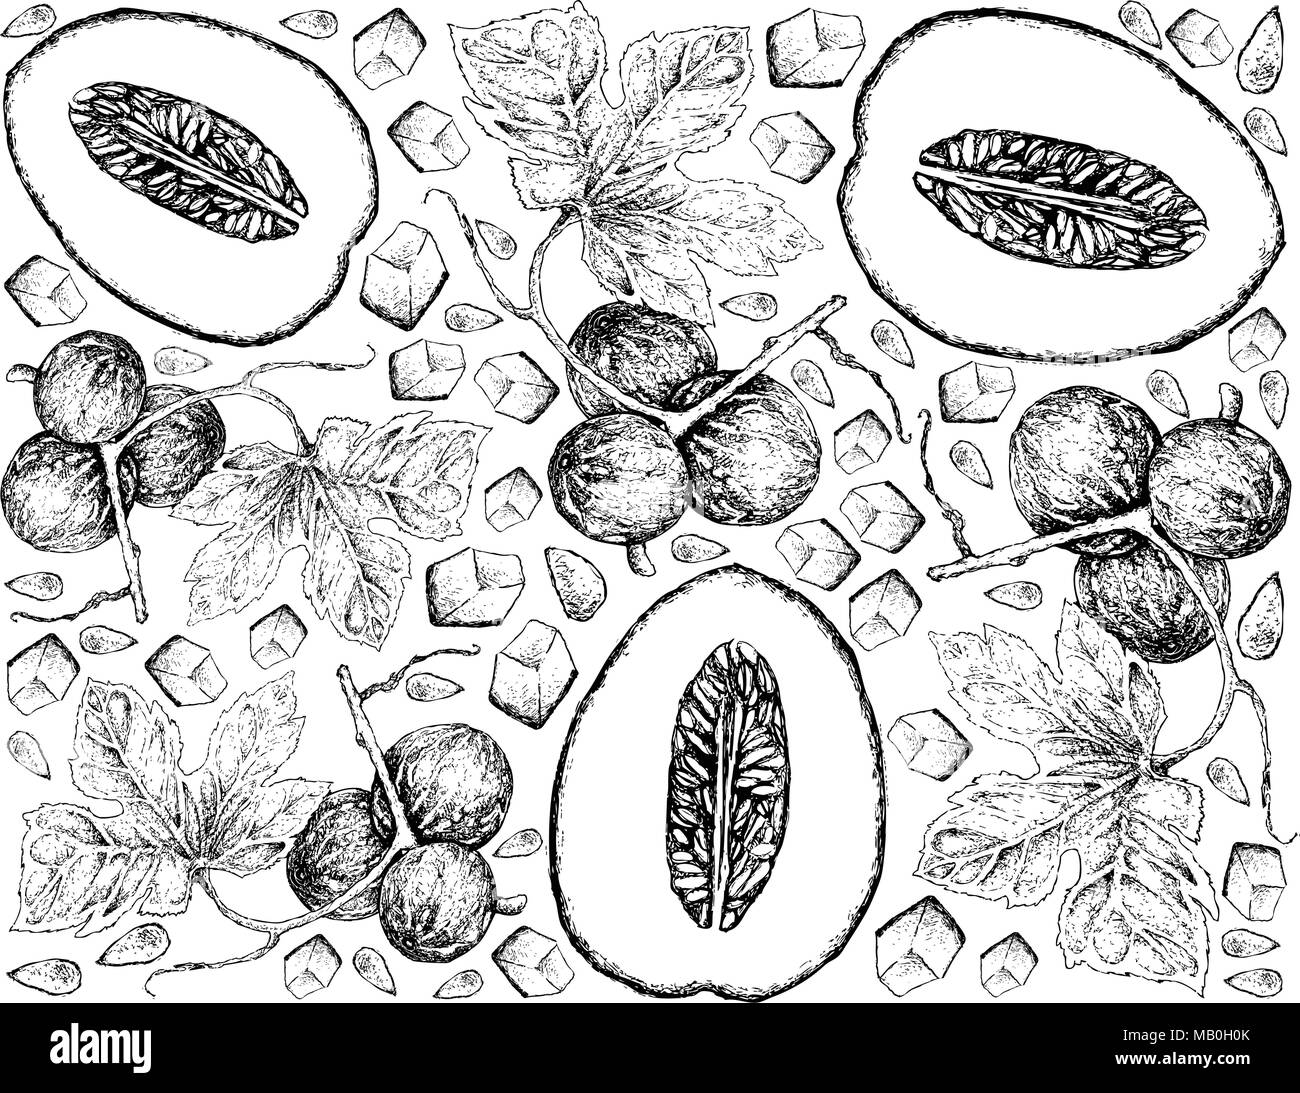 Exotic Fruit, Illustration Wallpaper Background of Hand Drawn Sketch of Honeydew Melon or Cucumis Melo and Native Bryony, Striped Cucumber or Diplocyc Stock Vector